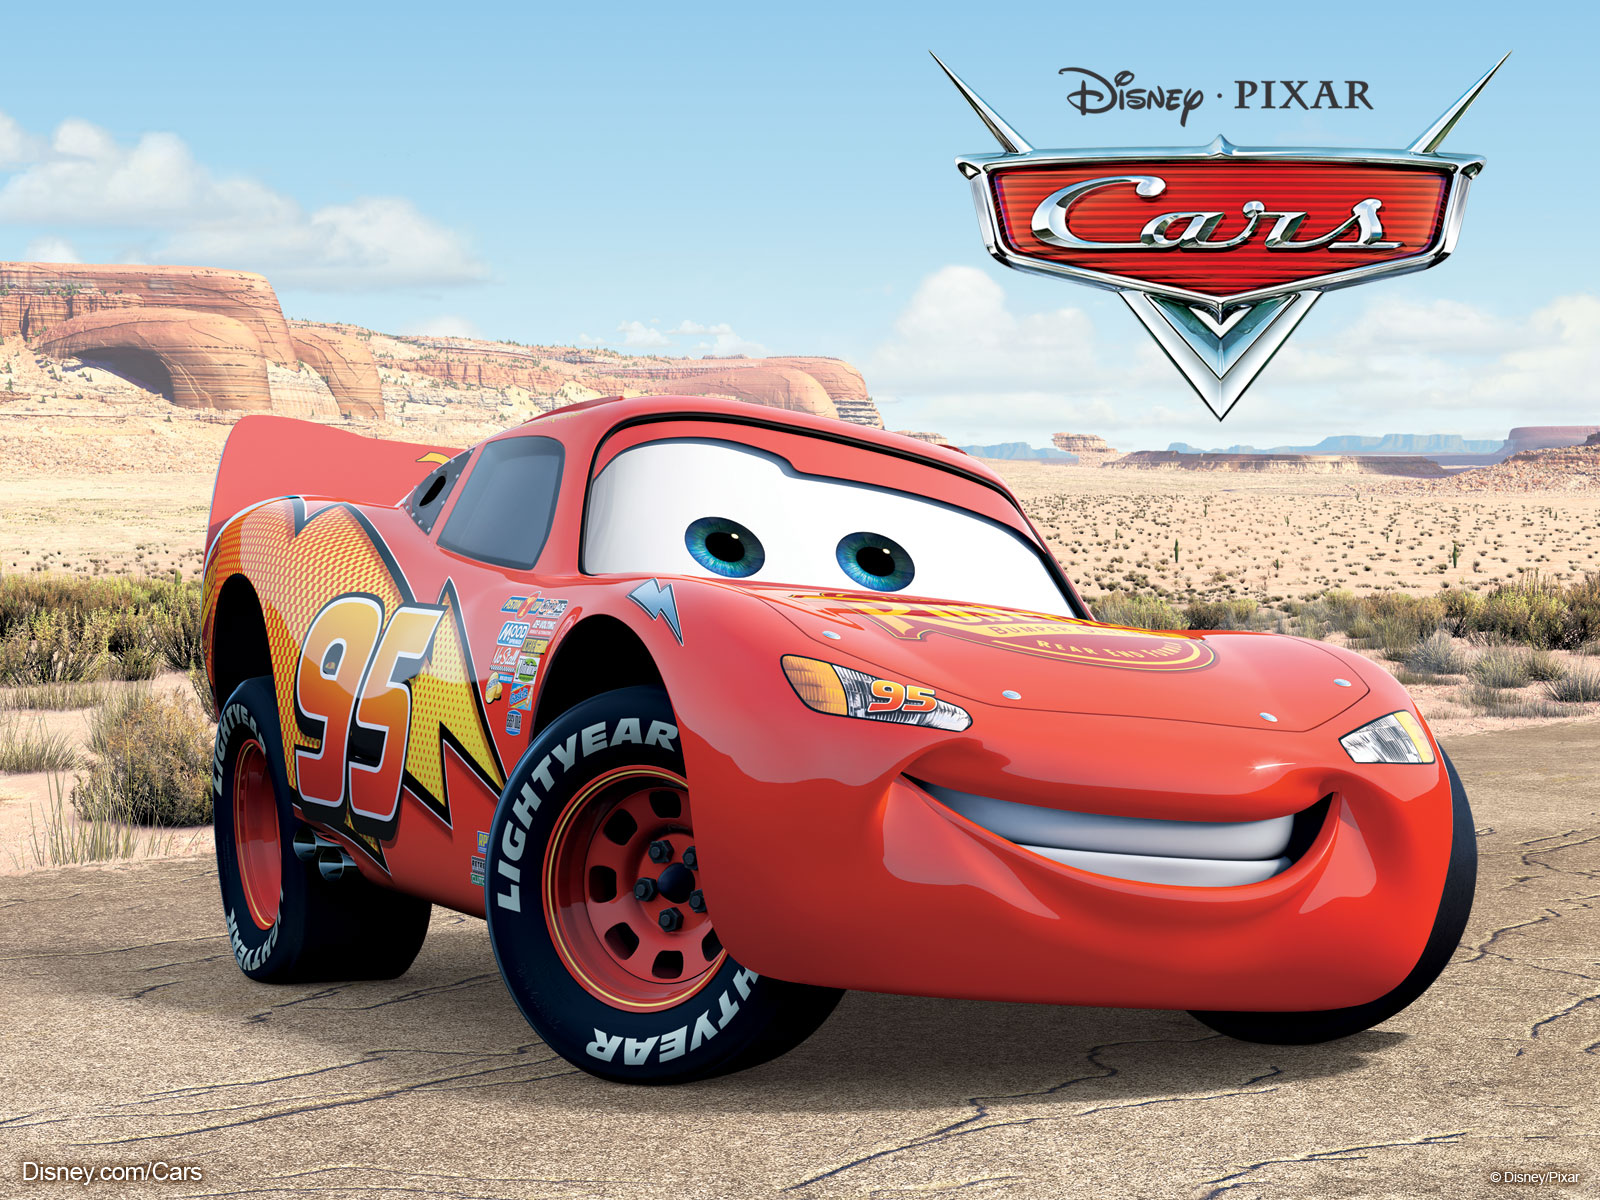  McQueen the red race car from the DisneyPixar move Cars wallpaper